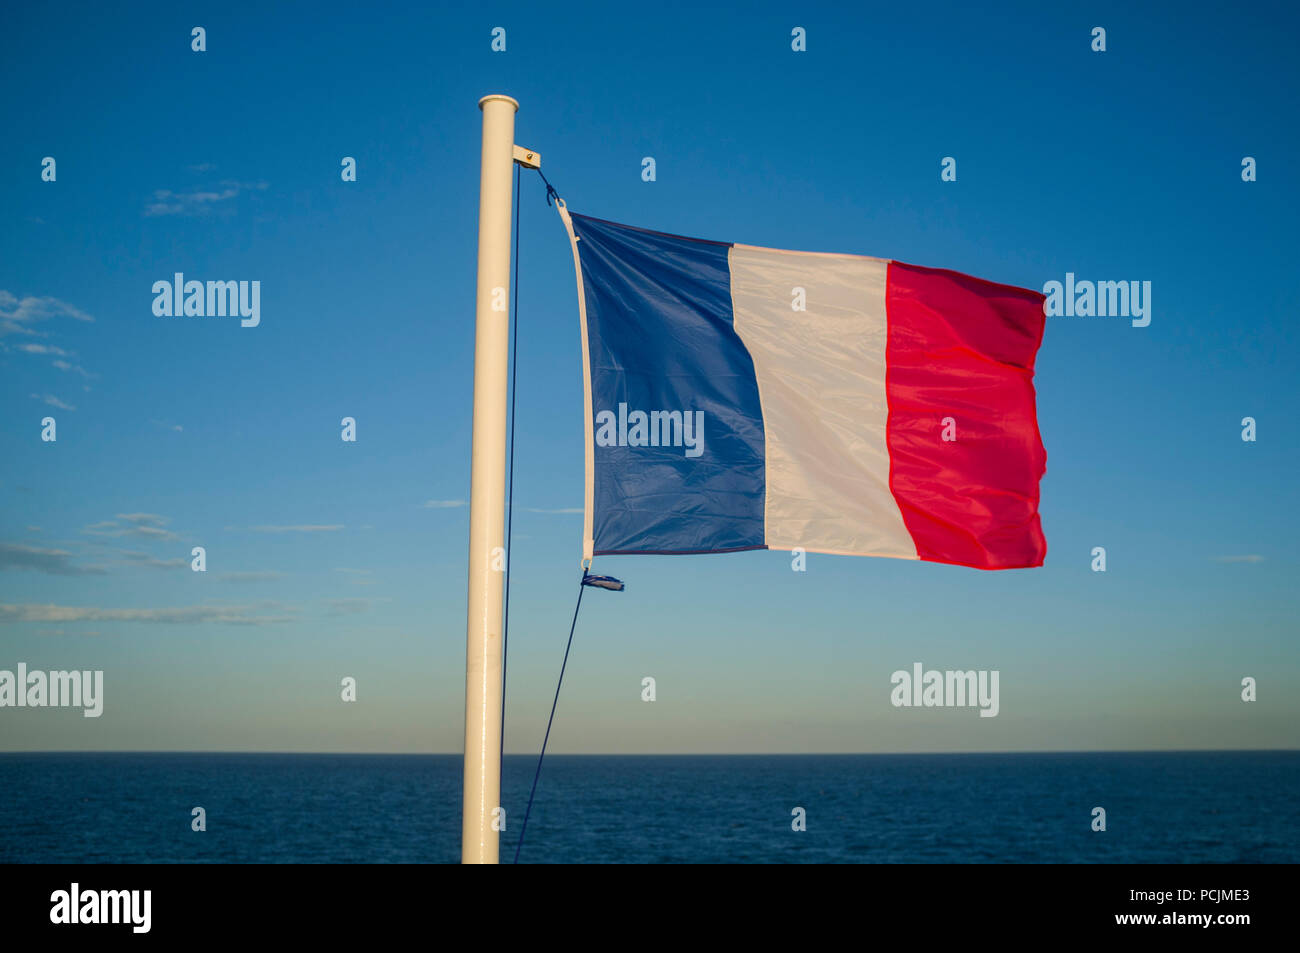 The French Tricolour or Tricolore flag flies in the evening sun on the cross-channel ferry from Le Havre. Stock Photo